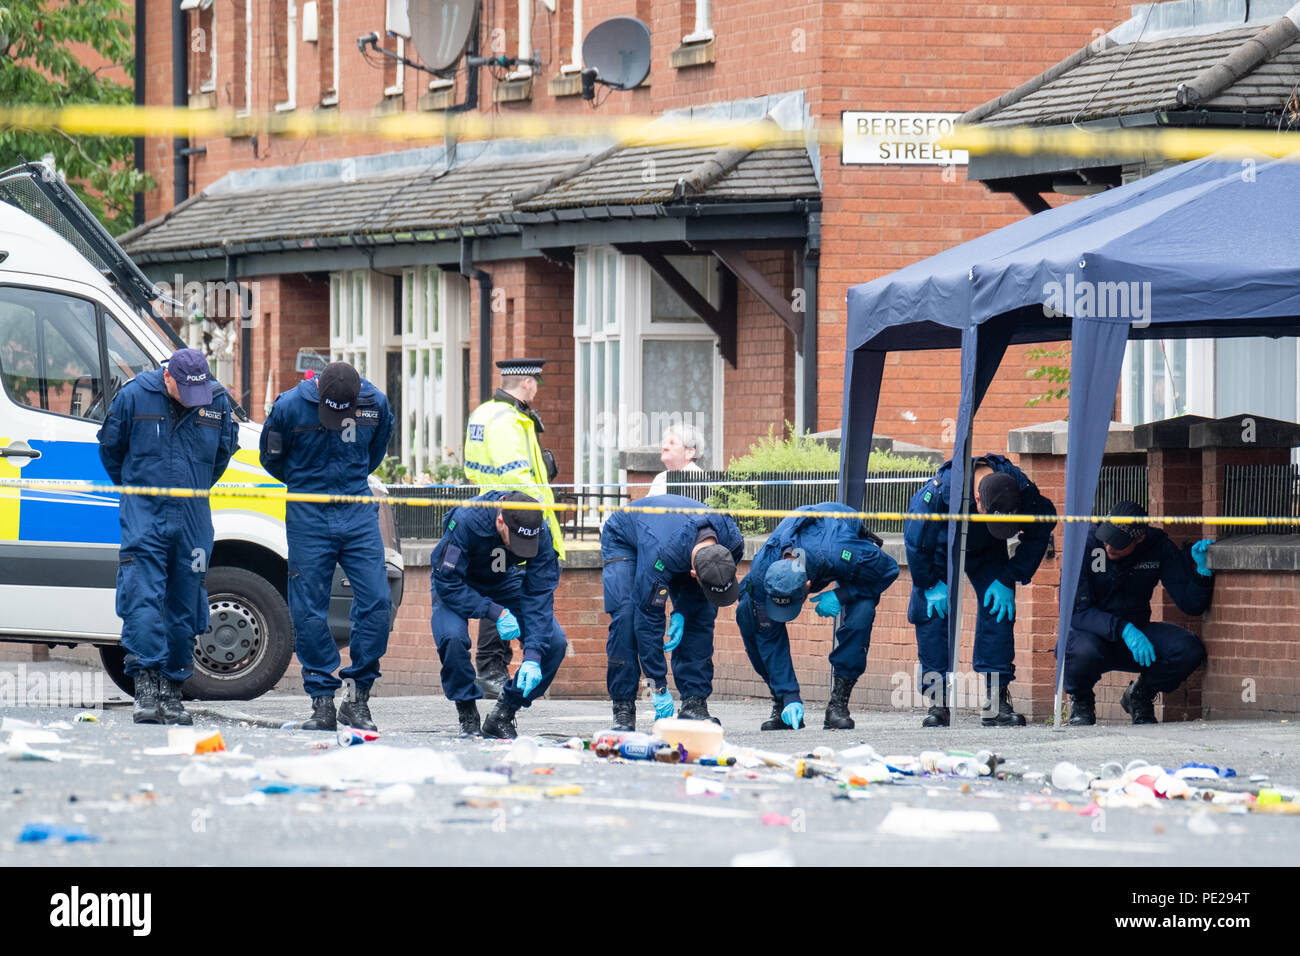 Manchester, UK. 12th August 2018. Two children are among 10 injured in a shooting at a street party in the Moss Side area of Manchester. Armed Police were called to Claremont Road at 02:30am on Sunday, August 12, 2018. Police said nine victims had 'pellet-type wounds that are not believed to be serious'. A 10th person is in a serious condition with leg wounds. © Christopher Middleton/Alamy Live News Stock Photo